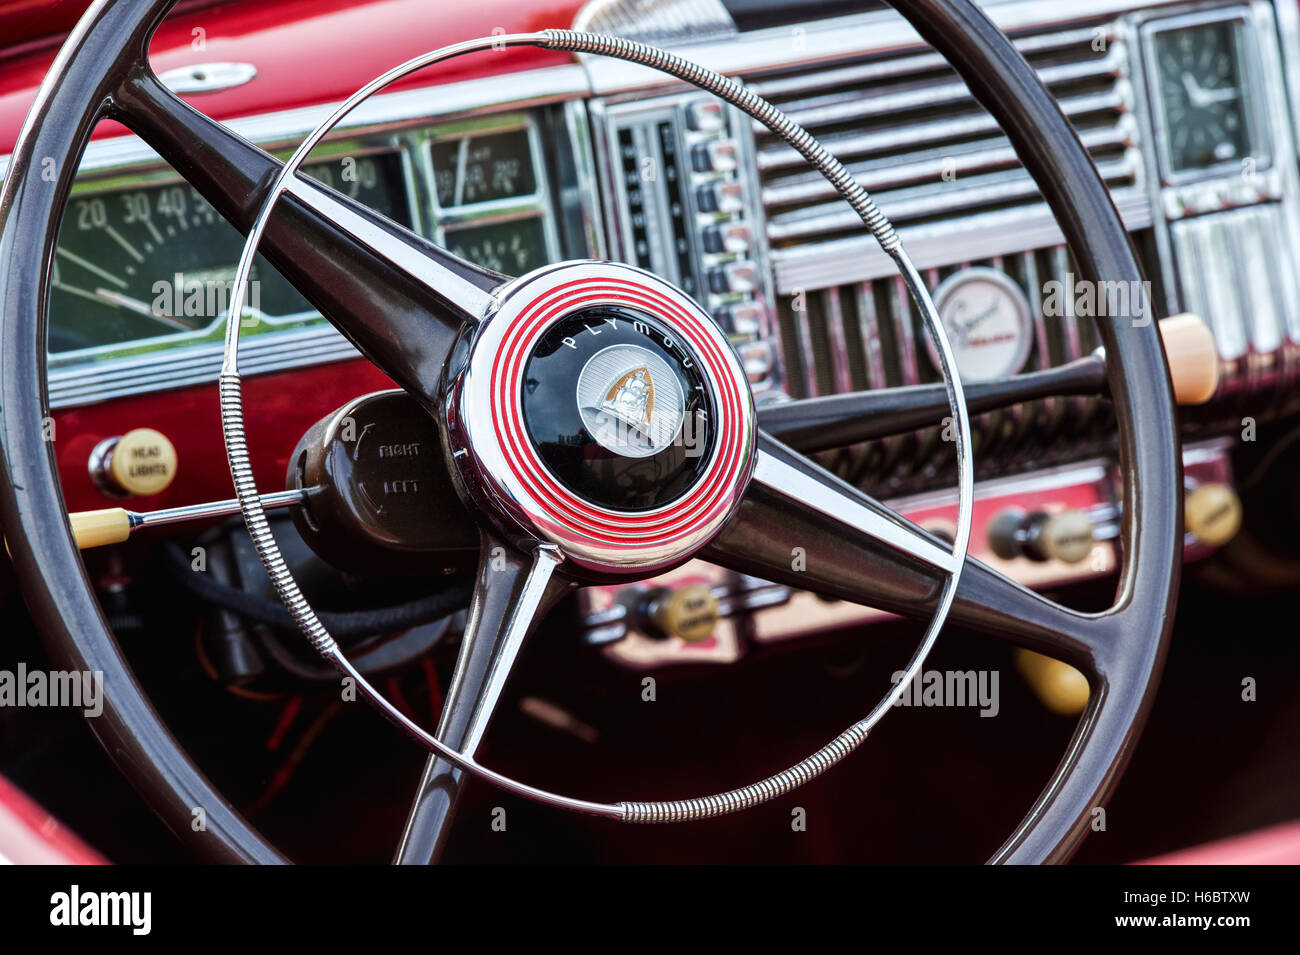 1947 Plymouth steering wheel and dashboard. Classic American car1947 Plymouth steering wheel and dashboard. Classic American car Stock Photo